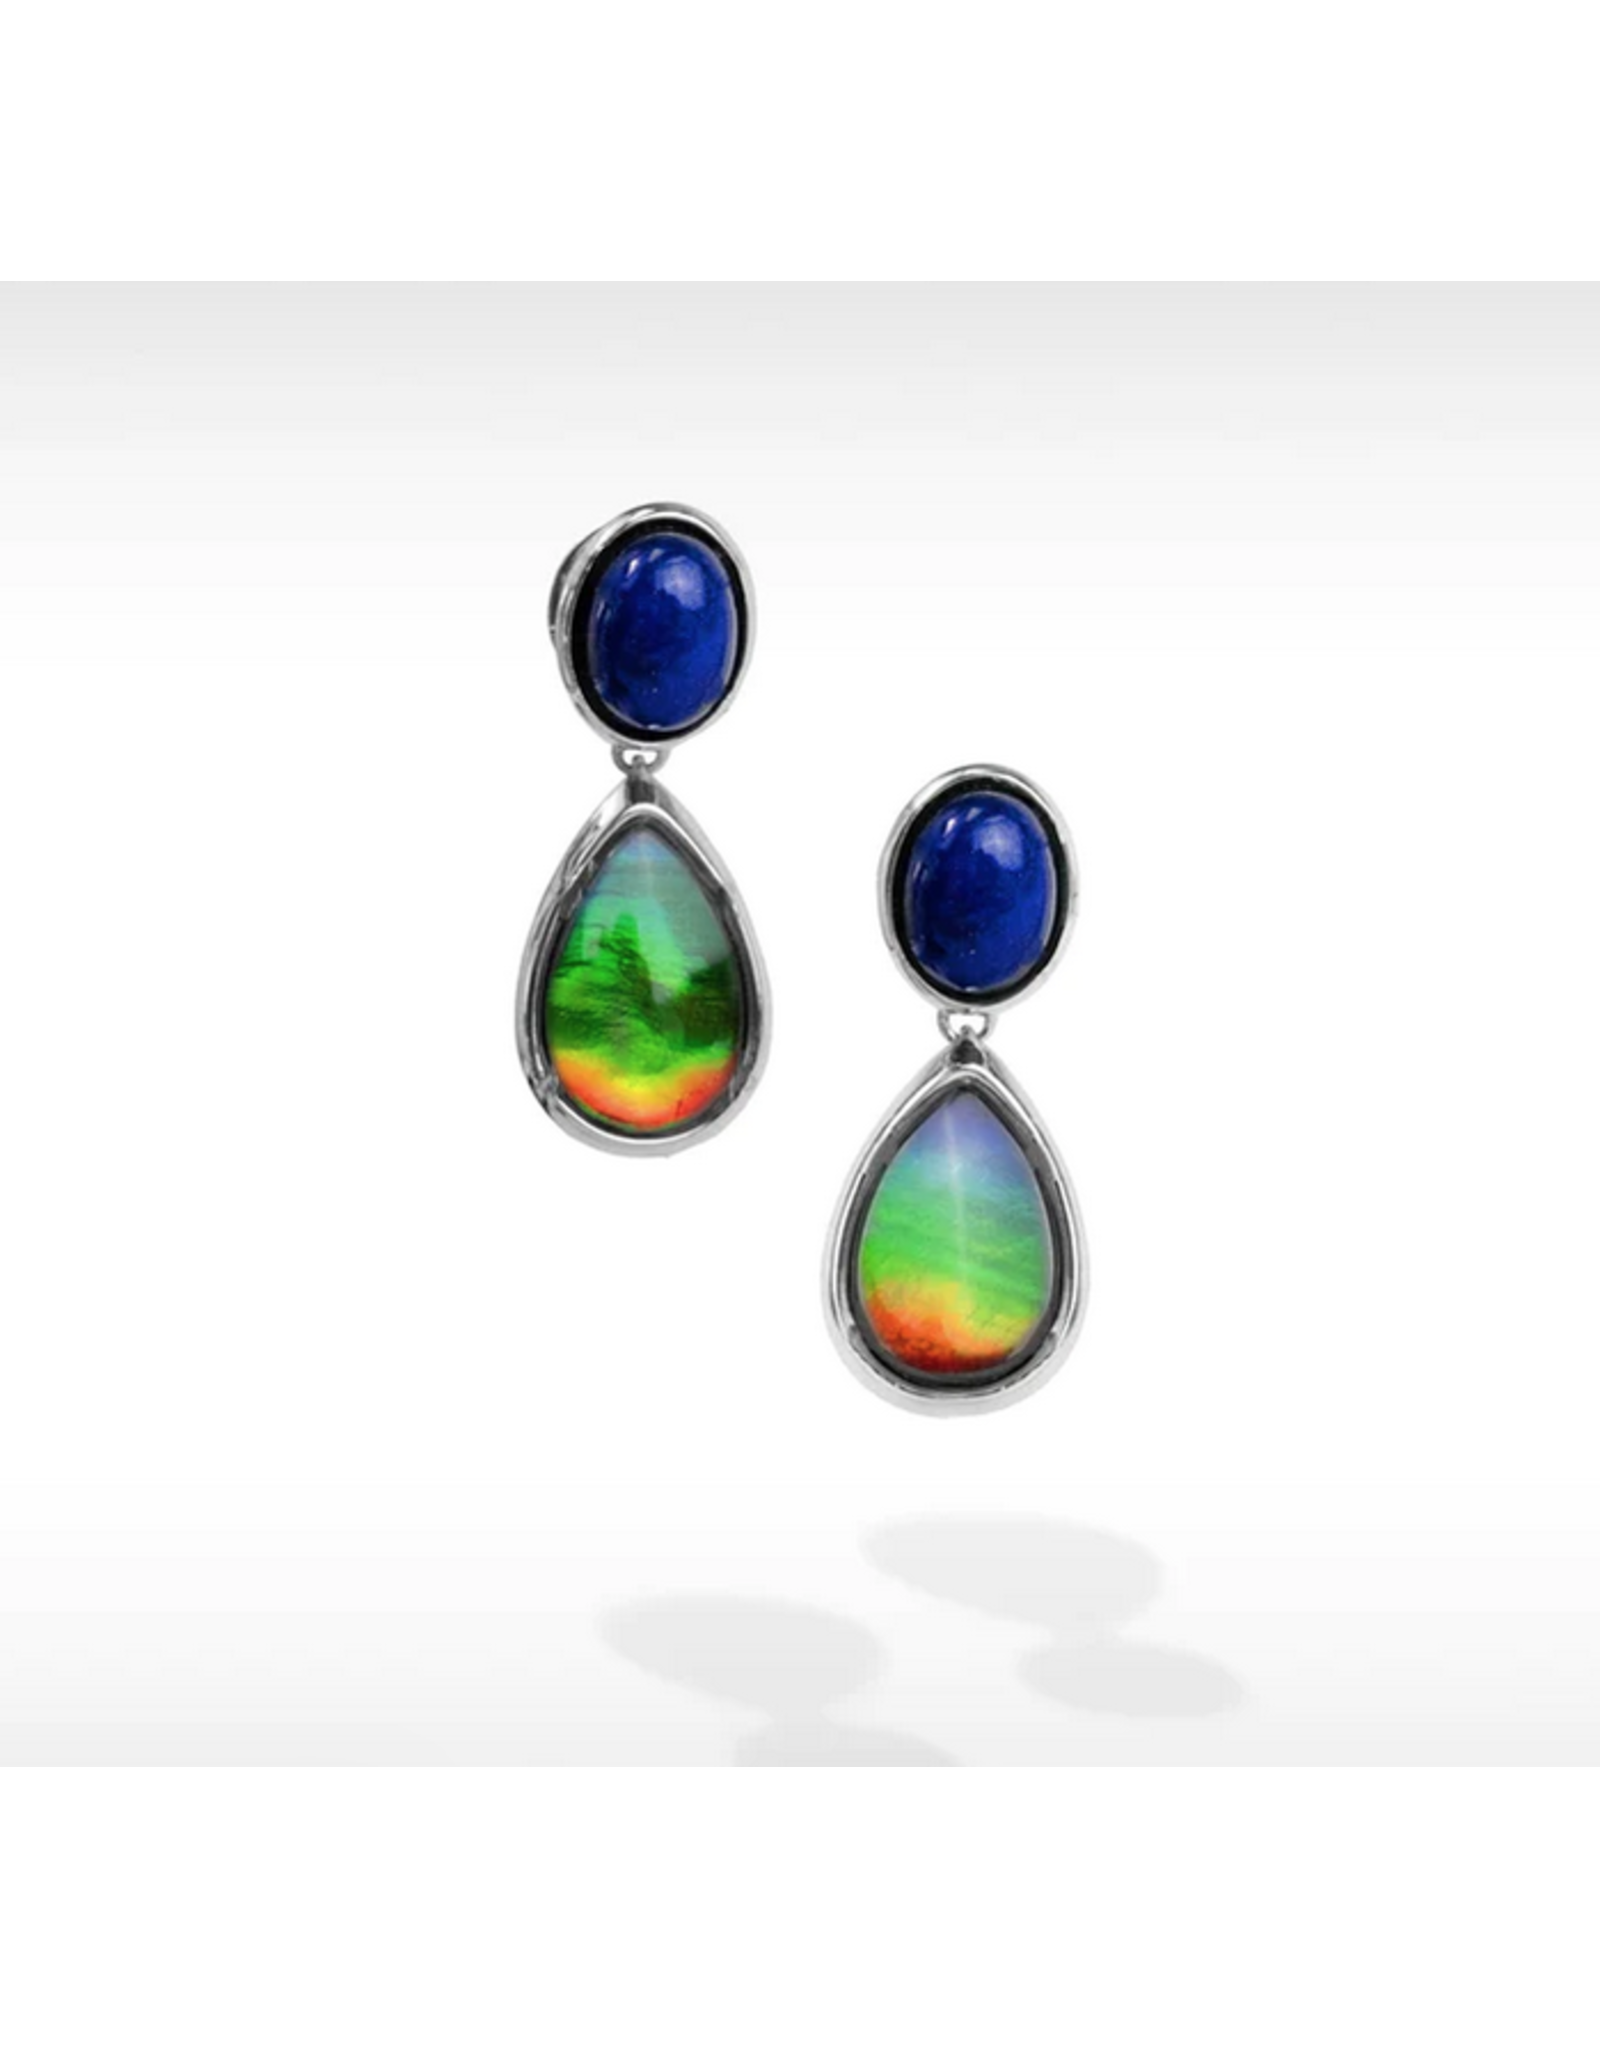 Harmony Silver Earrings with Lapis - JSDE02631A1